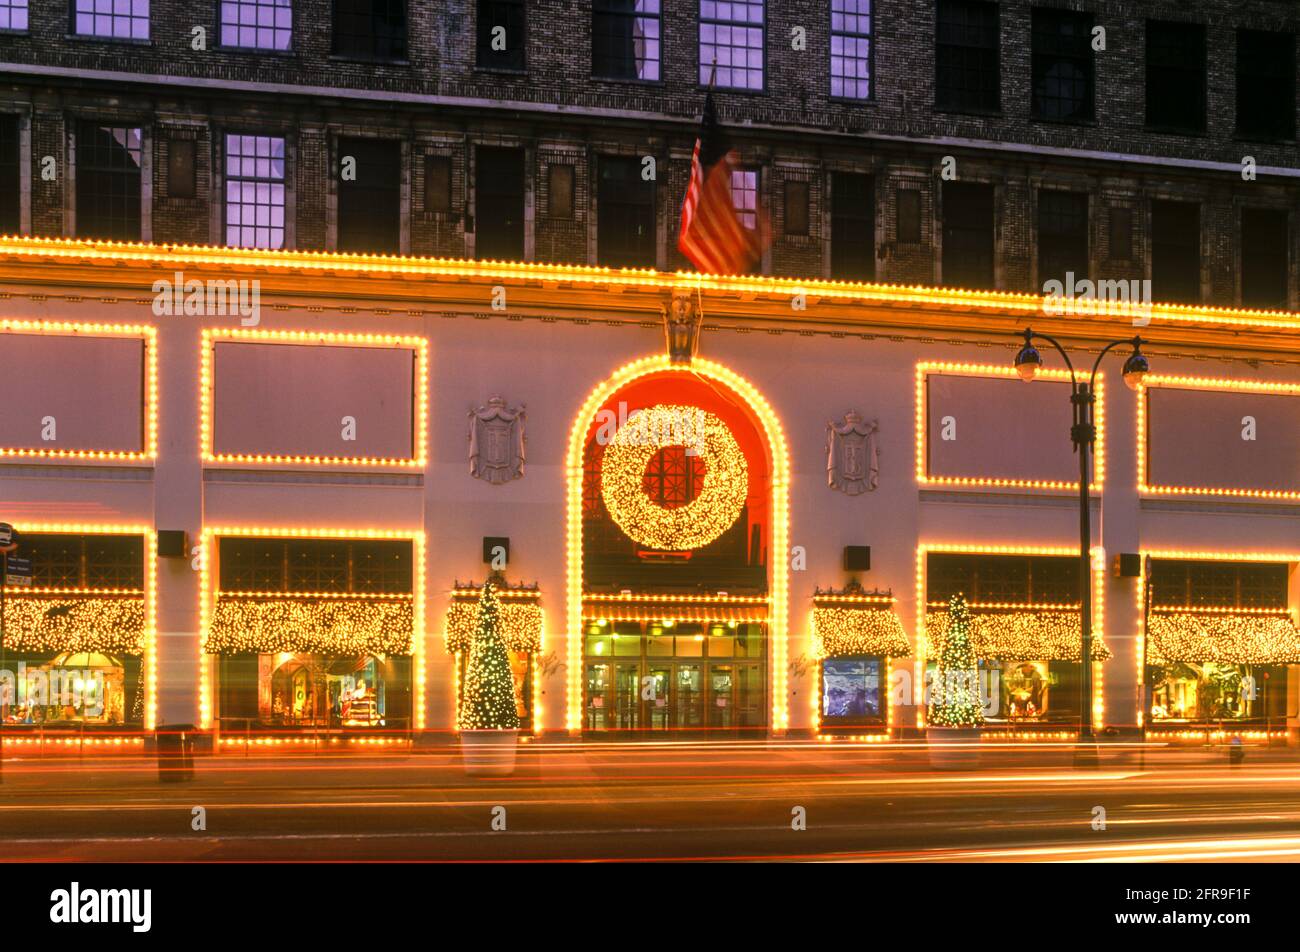 2005 HISTORICAL CHRISTMAS LIGHTS LORD AND TAYLOR DEPARTMENT STORE (©STARRET & VAN VLECK 1914) FIFTH AVENUE MANHATTAN NEW YORK CITY USA Stock Photo